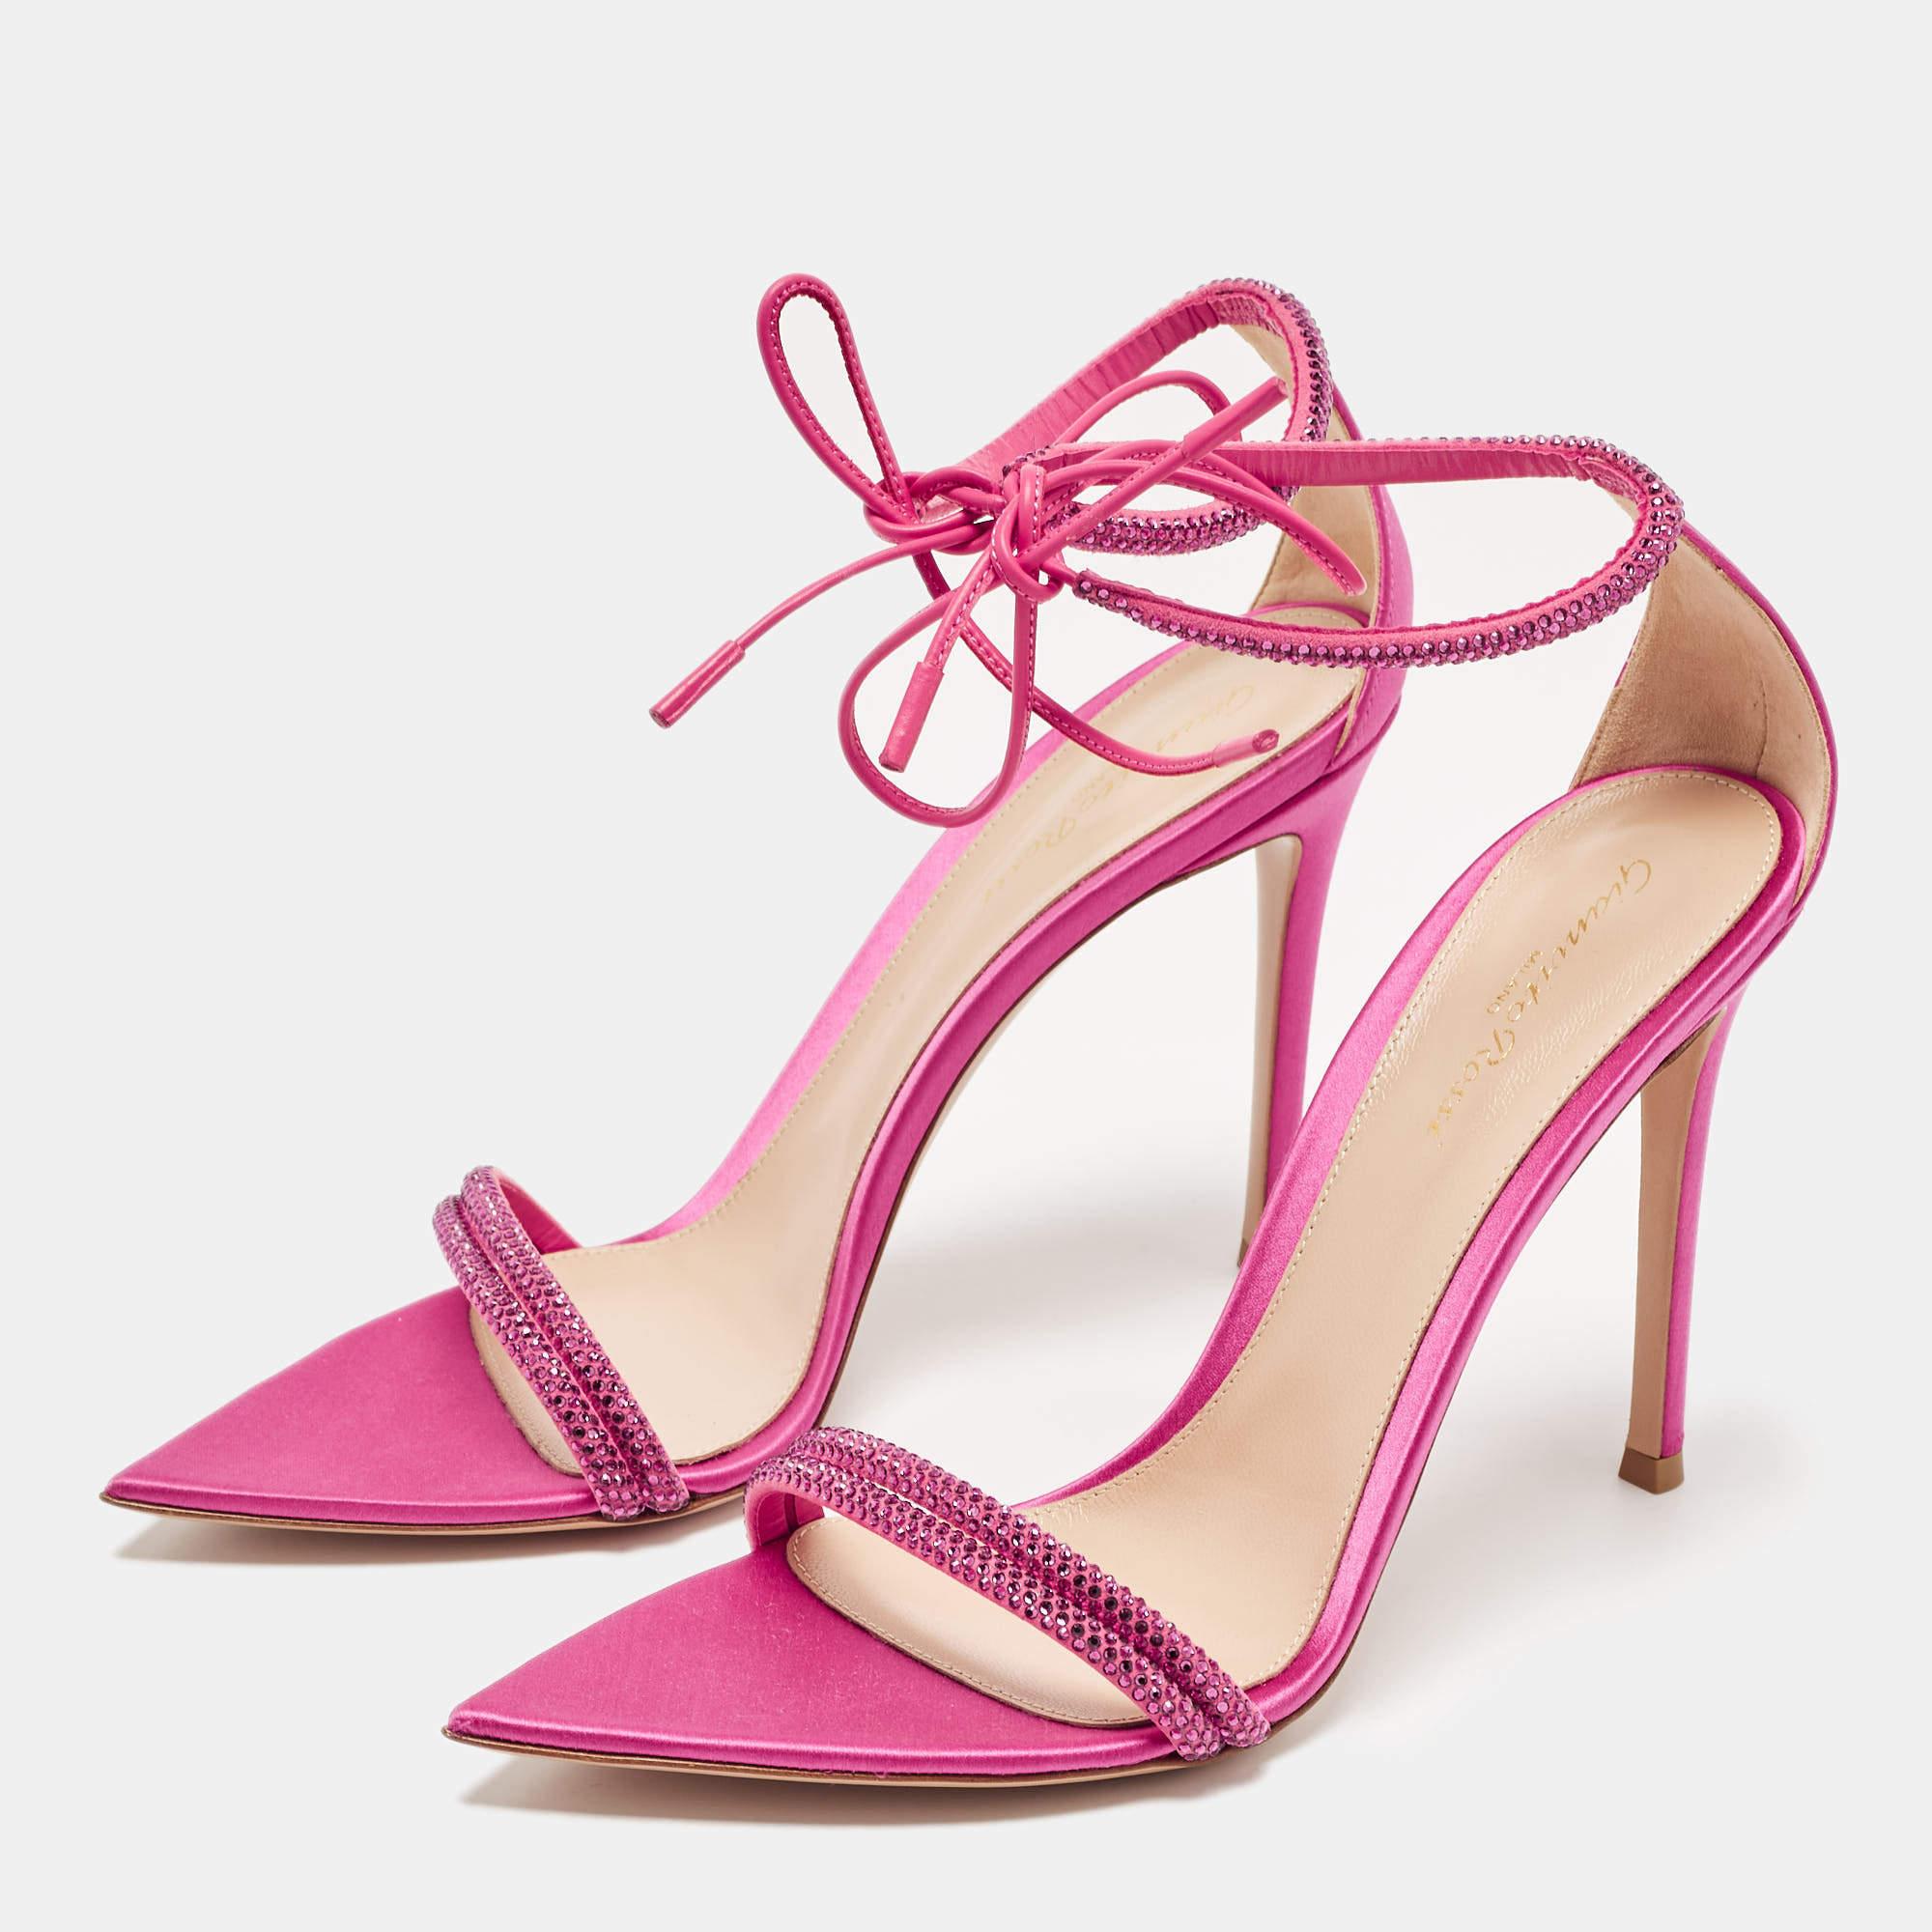 Gianvito Rossi Pink Satin Embellished Montecarlo Sandals Size 40.5 For Sale 1